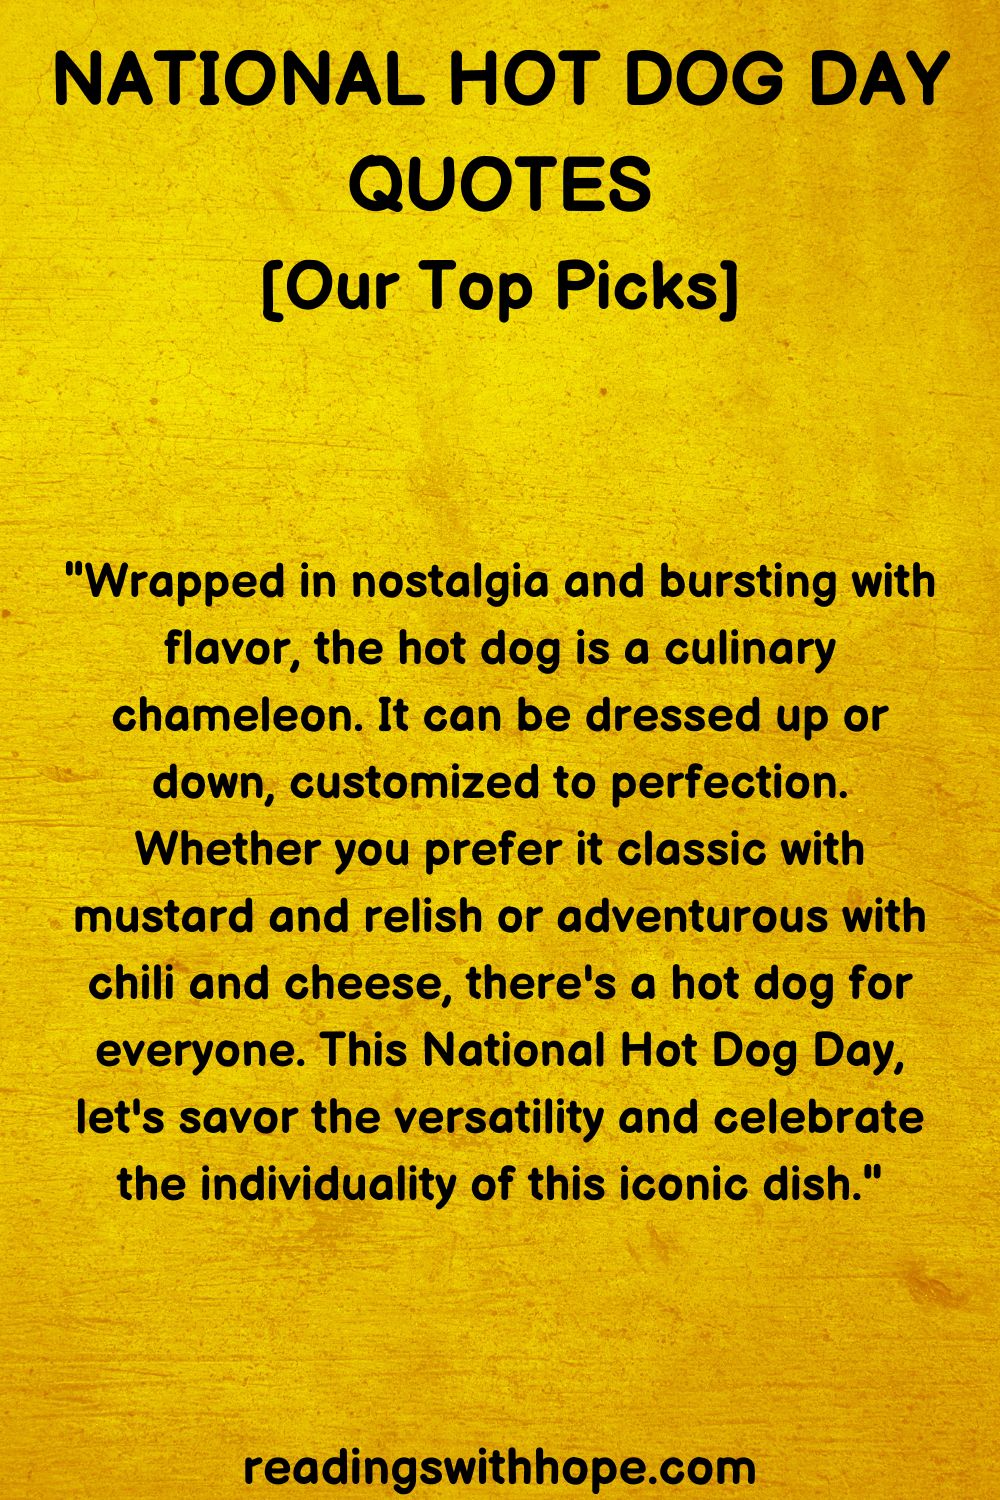 32 National Hot Dog Day Quotes and Messages